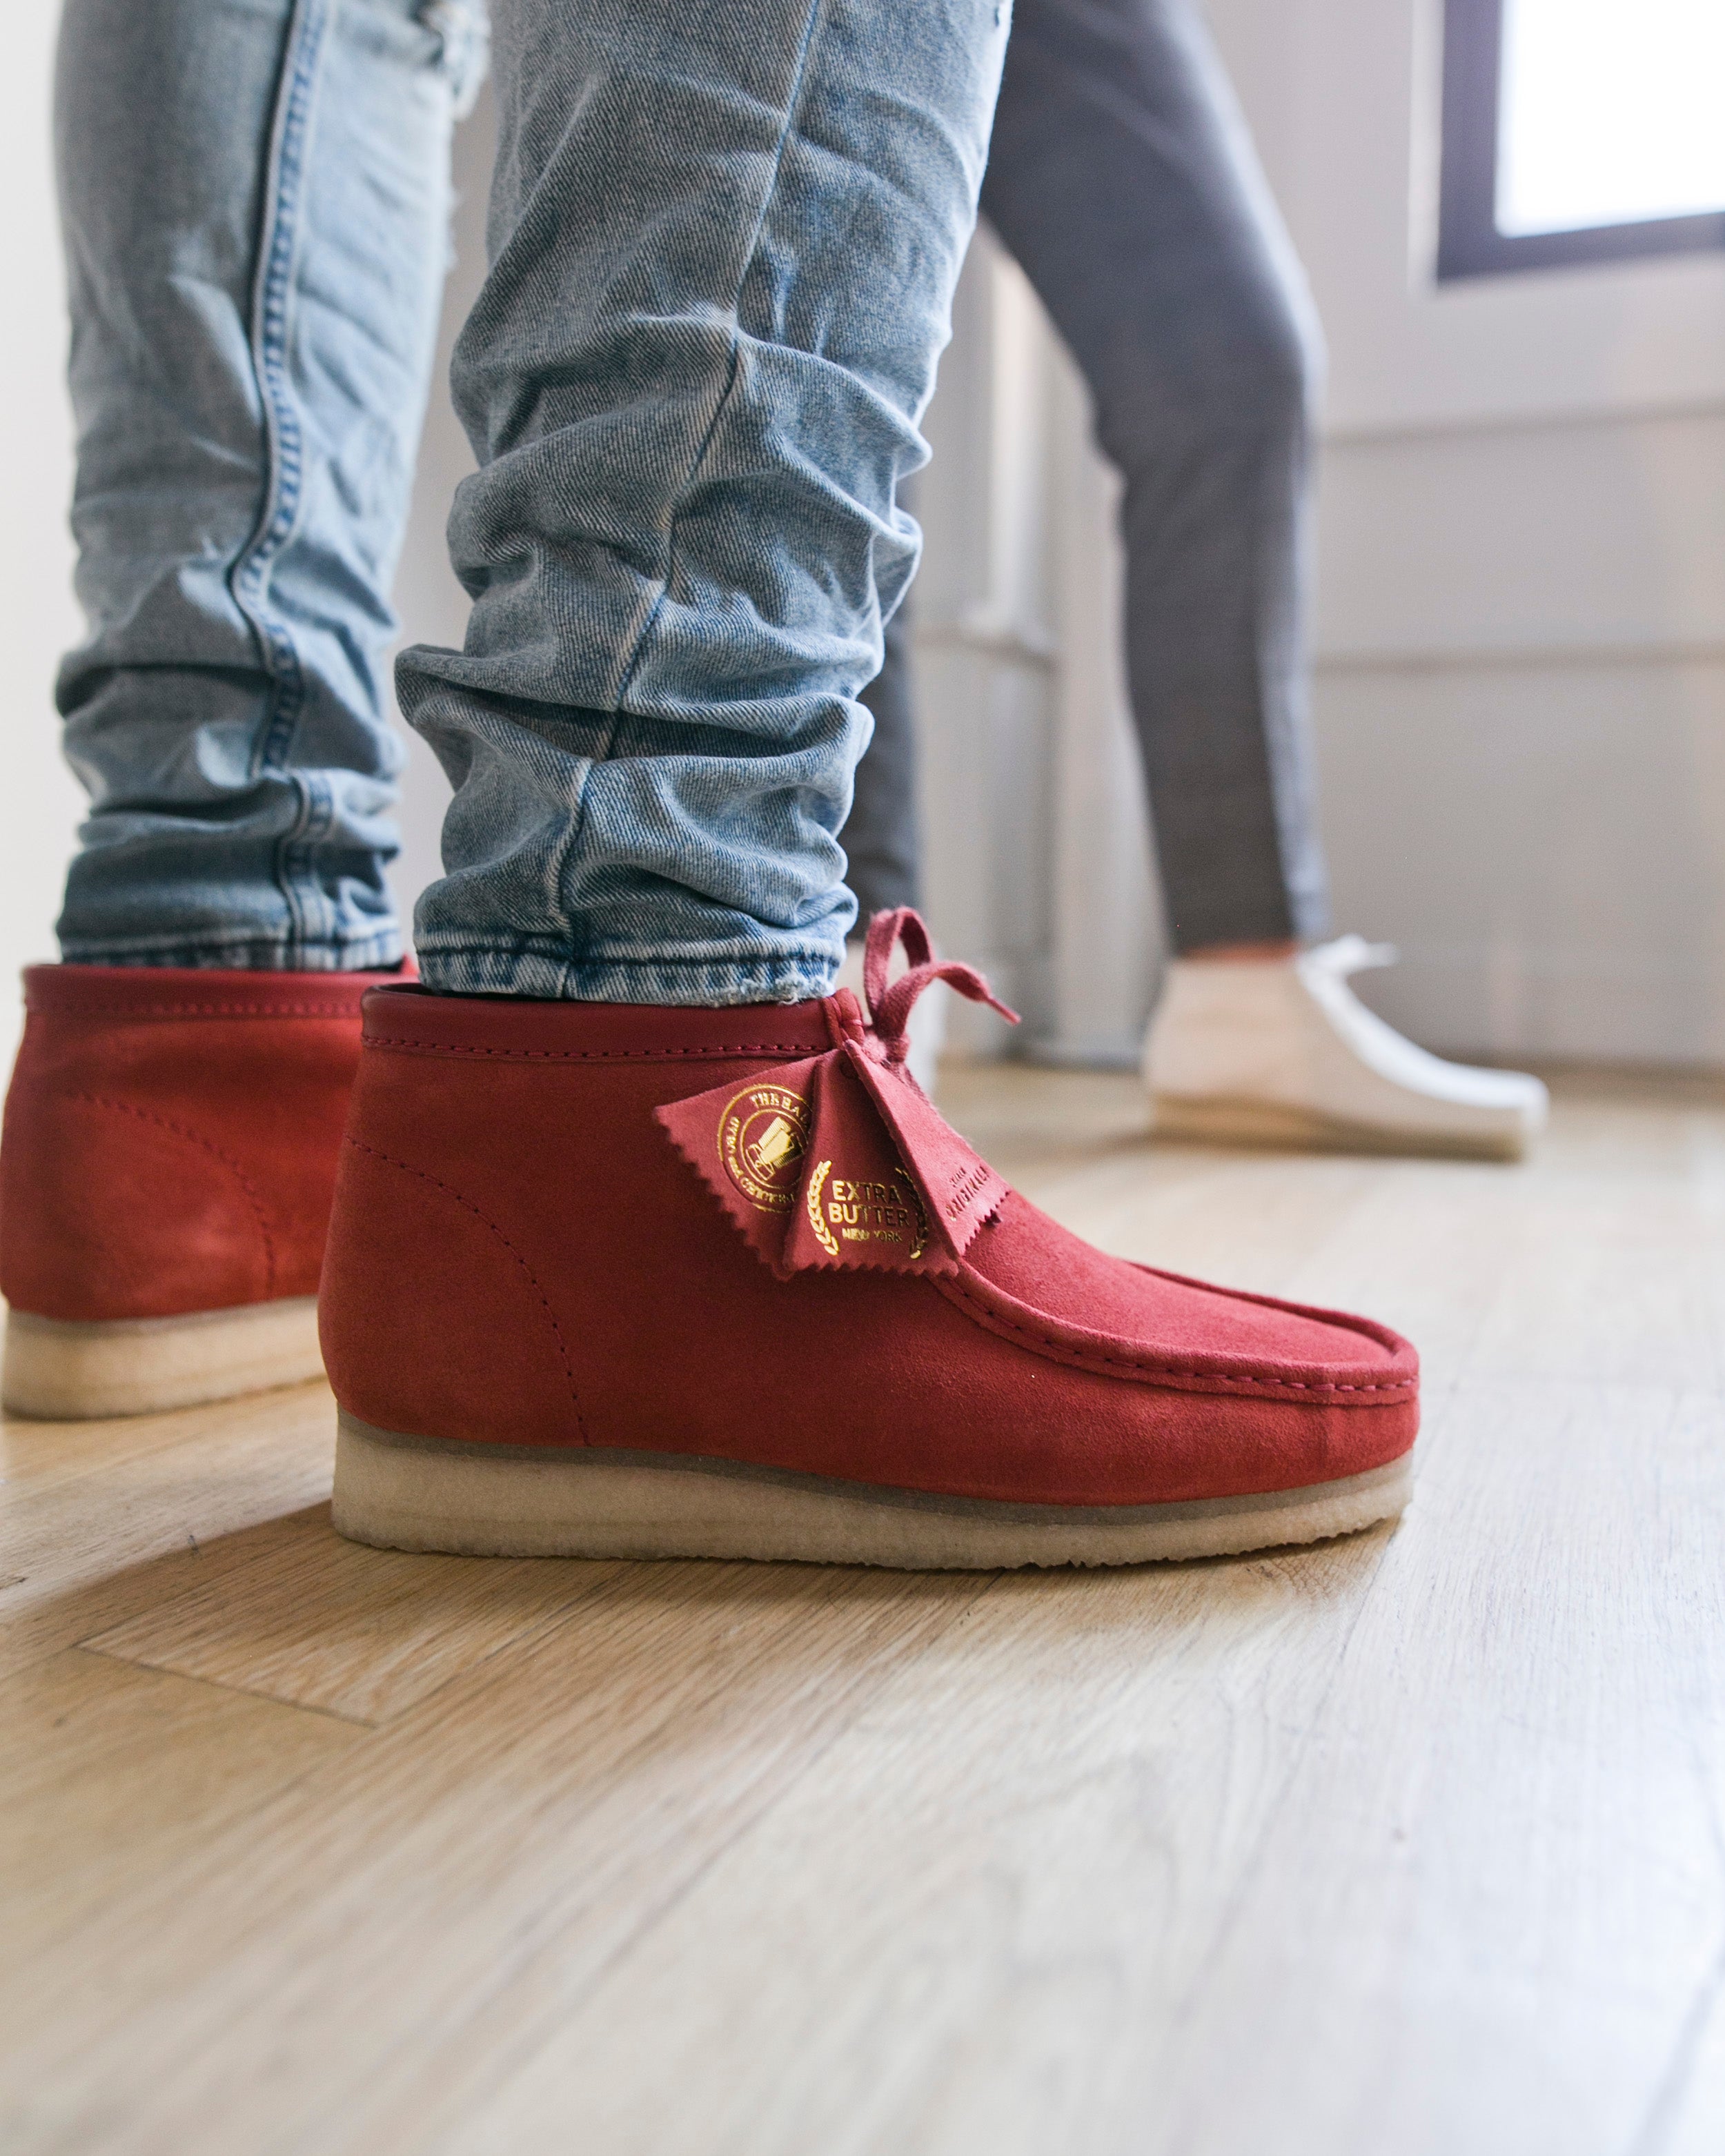 Extra Butter x The Halal Guys x Clarks Originals "Halalabees" article image